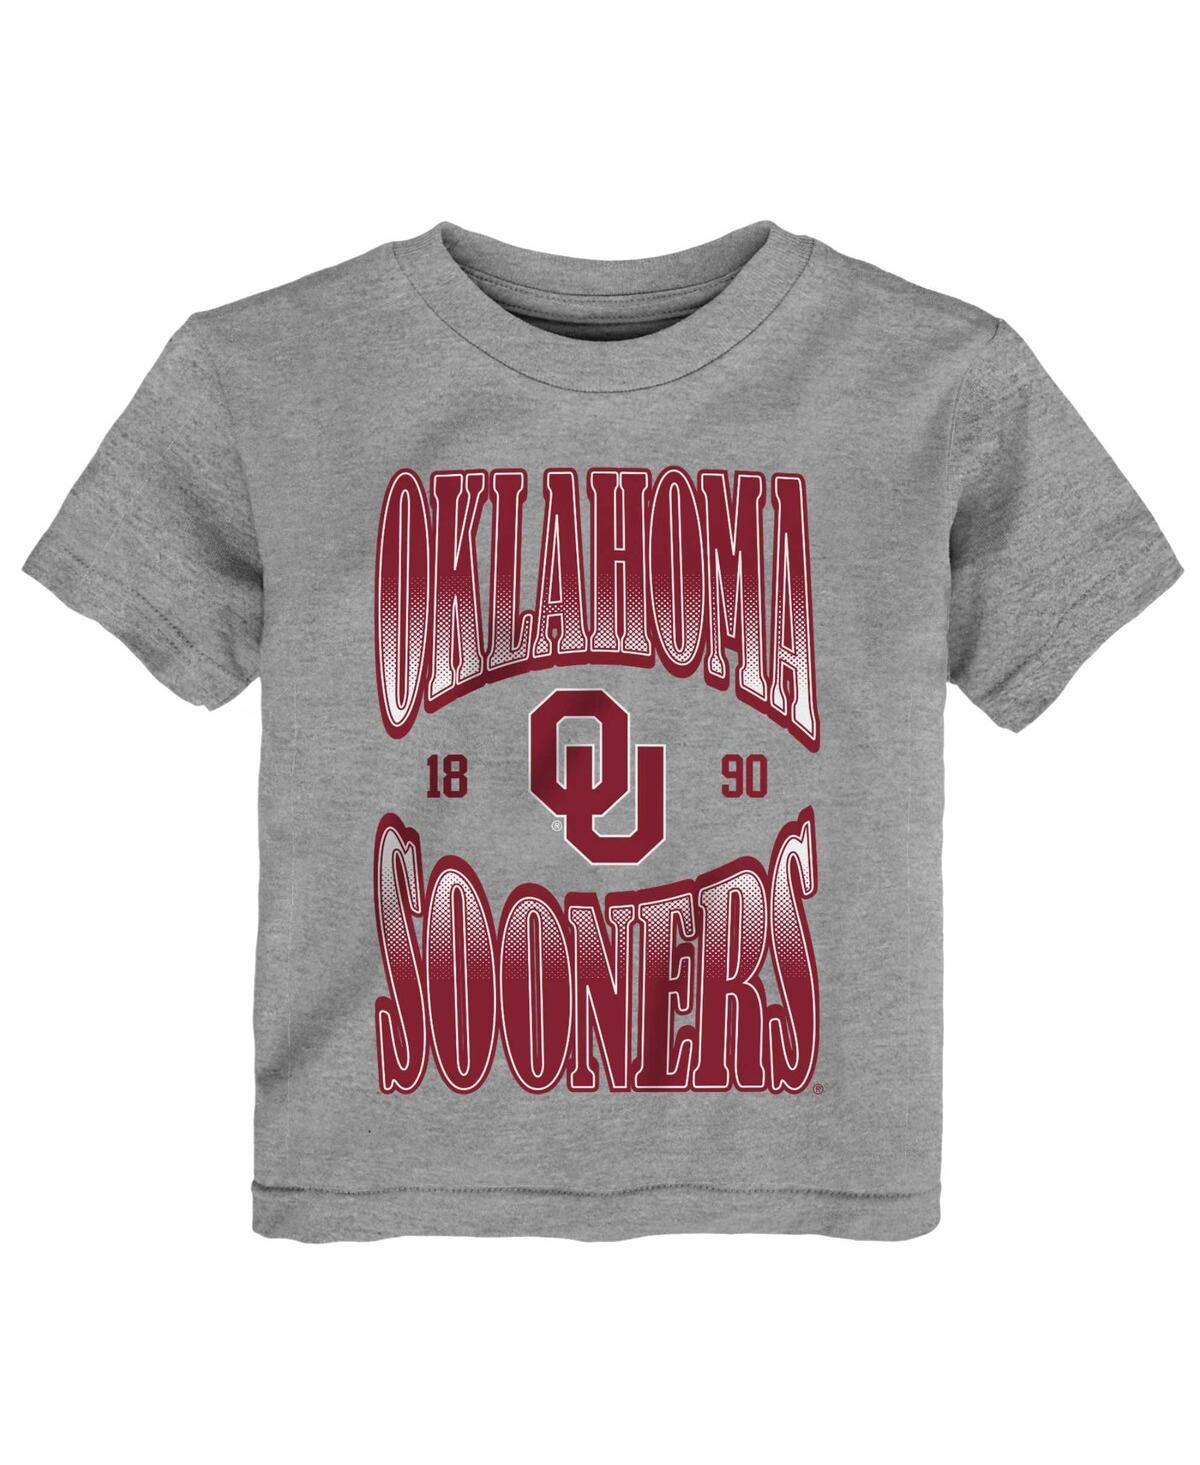 Outerstuff Babies' Toddler Boys And Girls Heather Gray Oklahoma Sooners Top Class T-shirt